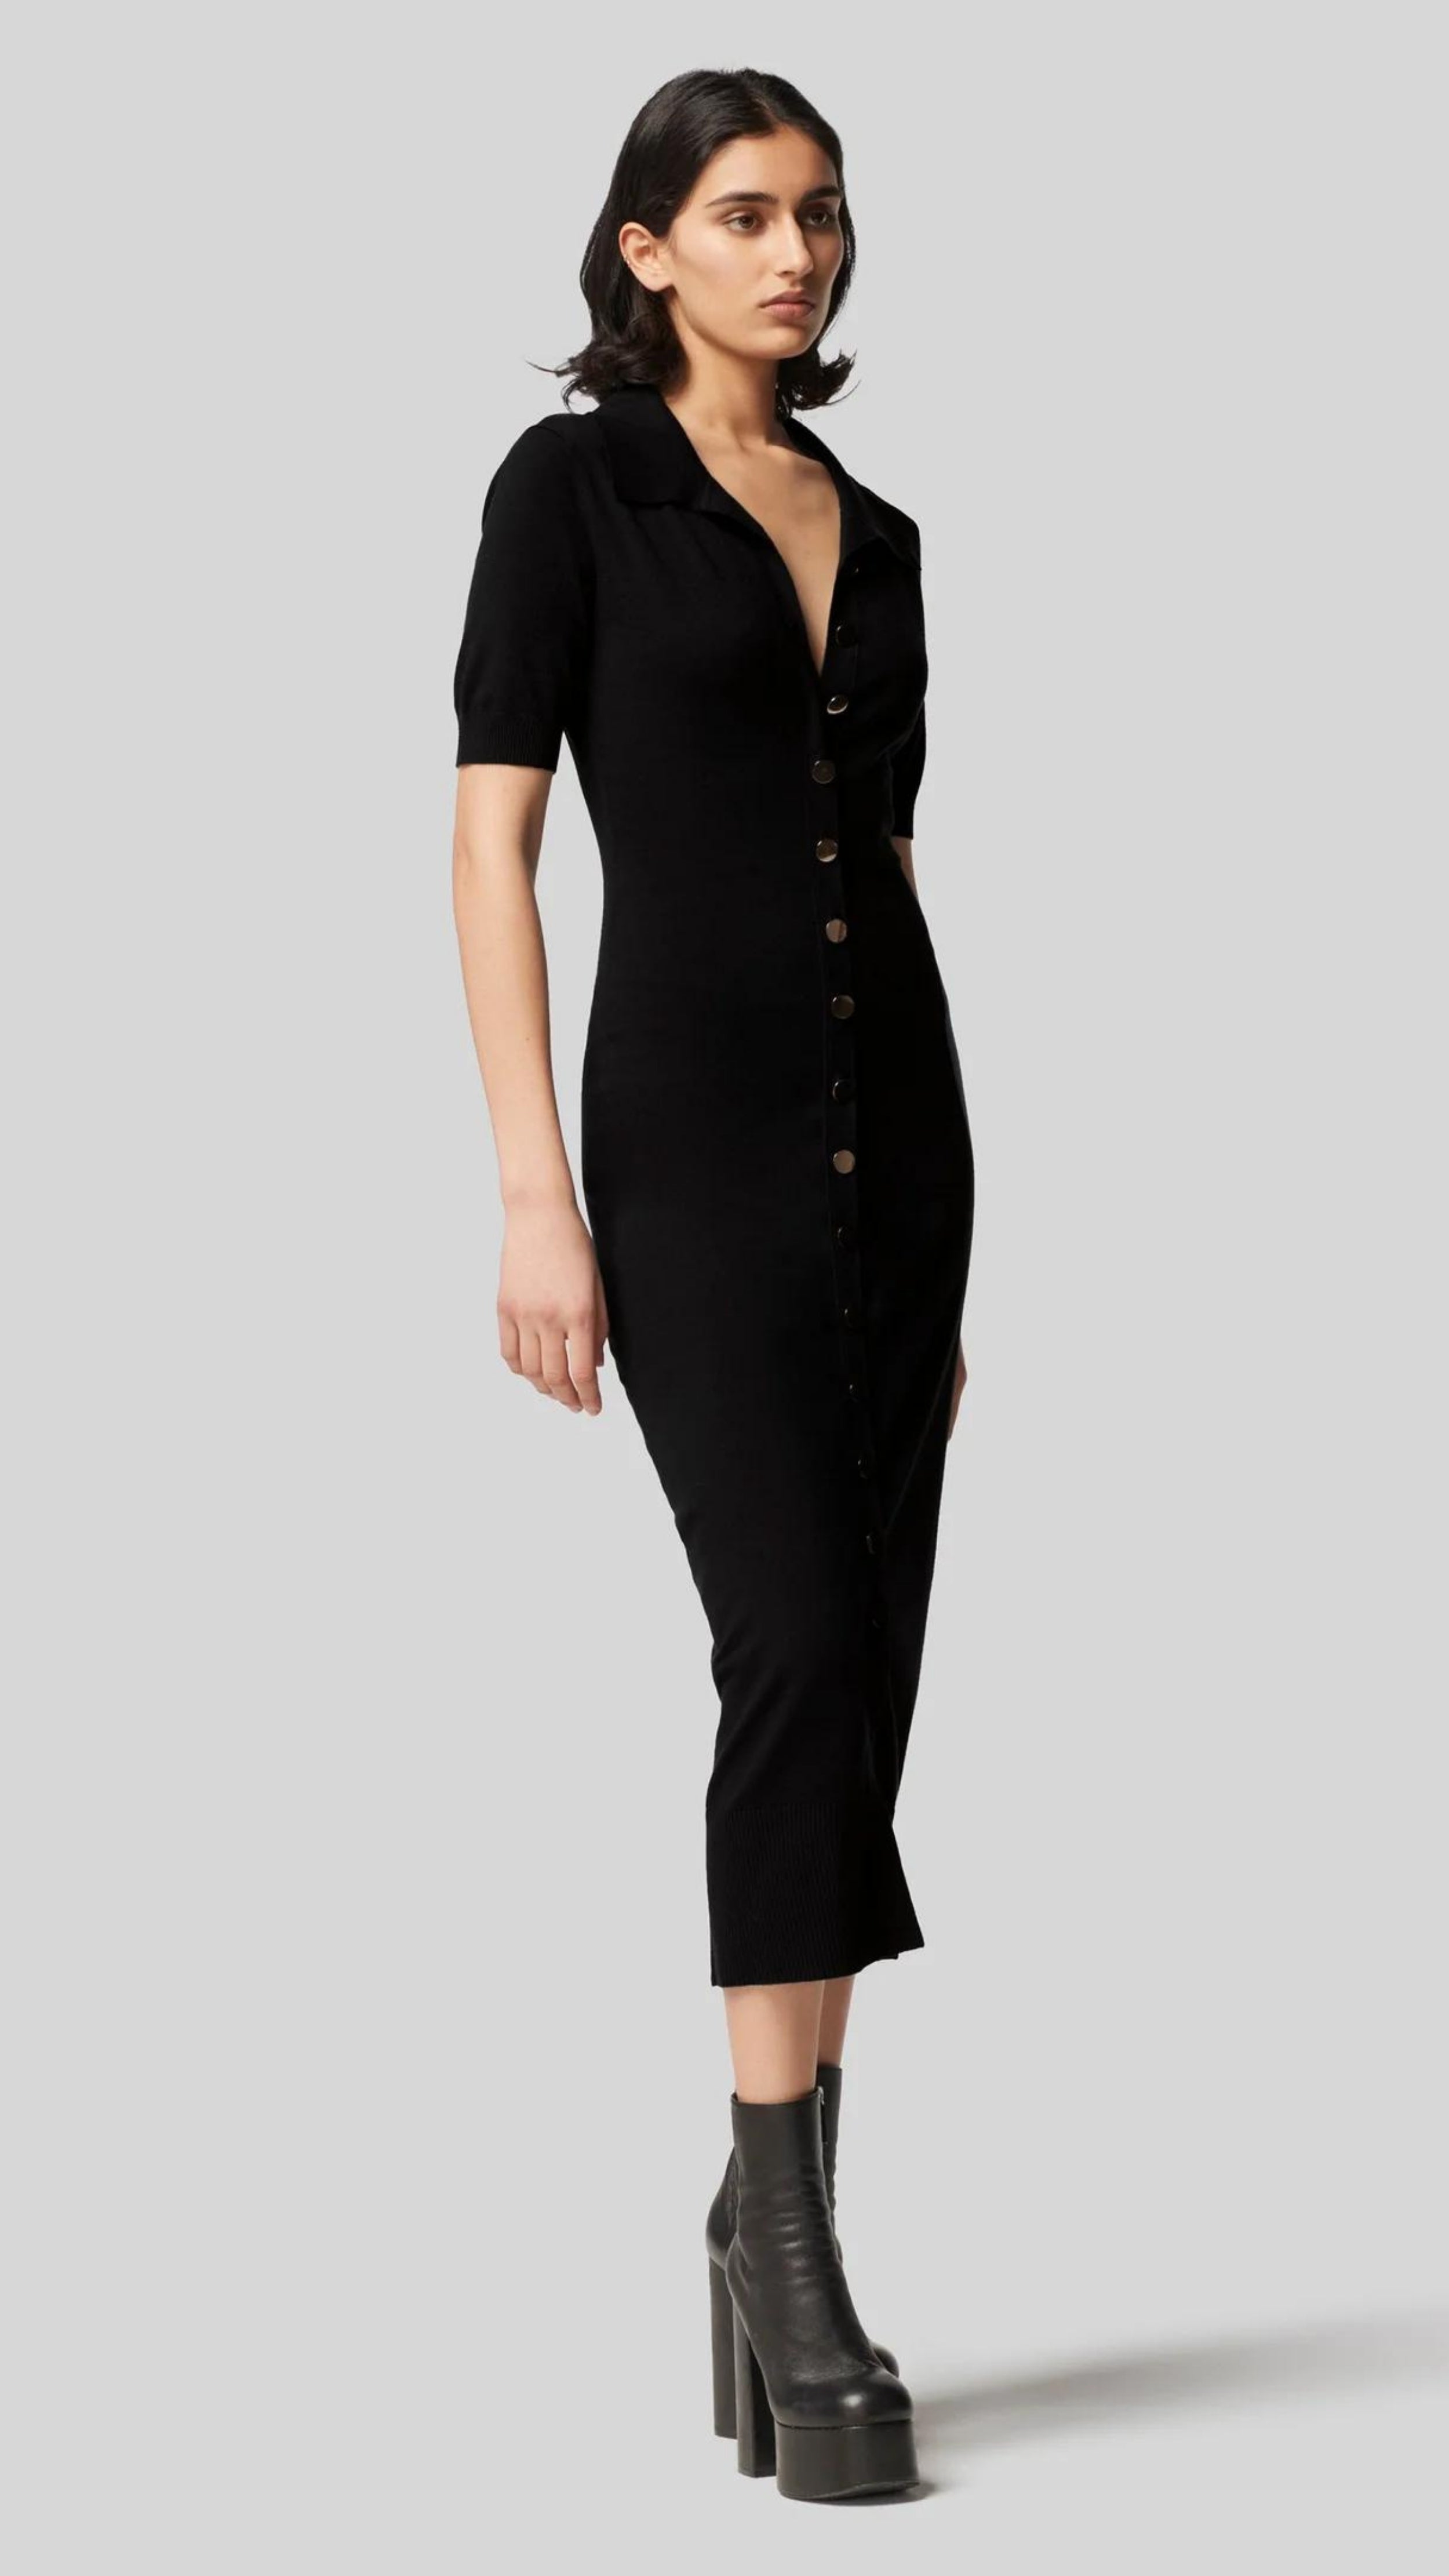 Altruzarra Hestia Dress in Black. A lightweight, super soft knit dress. Body fitting with gold buttons from front top to bottom. Midi length, shirt collar and half short sleeves. Black. Shown on model from front side view. Available at experience 27 in Madrid Spain.